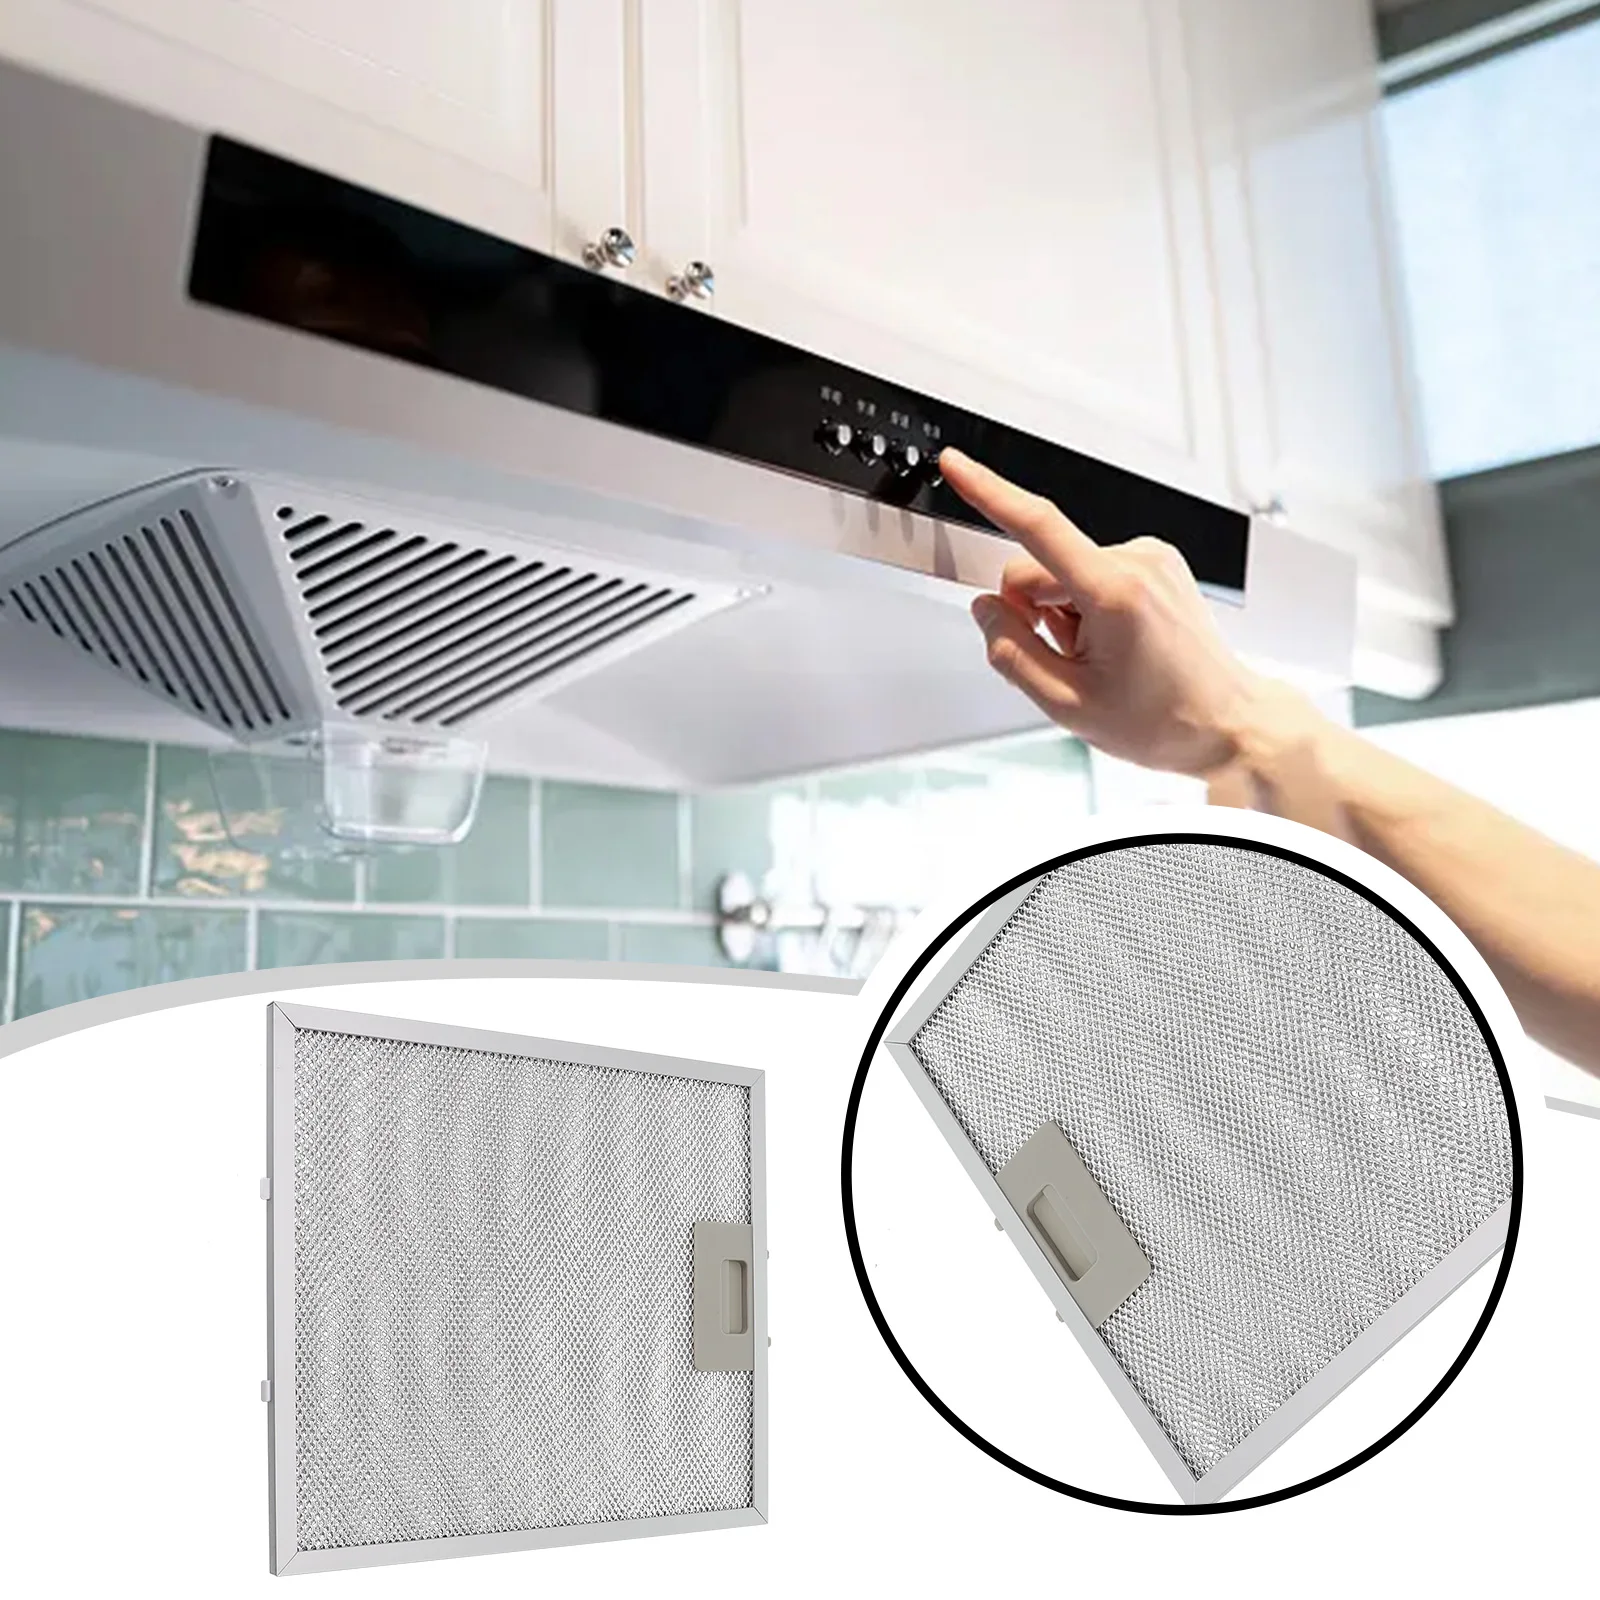 

Aluminized Grease Filtration Silver Cooker Hood Filters 305 x 267 x 9mm Maintain Fresh Air Replace Every 3 6 Months